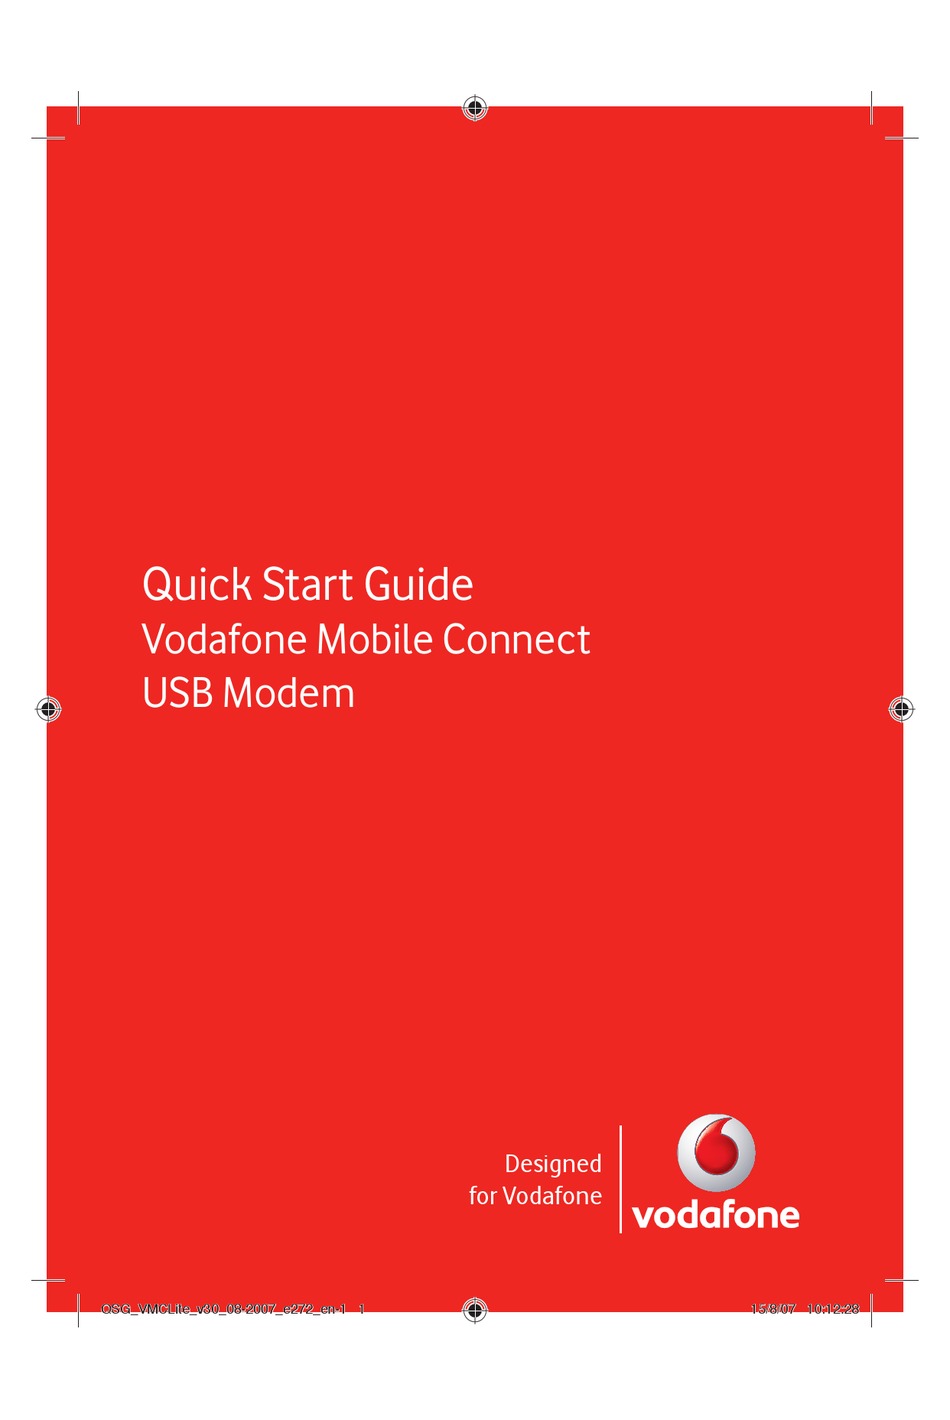 how to connect vodafone usb modem to pc